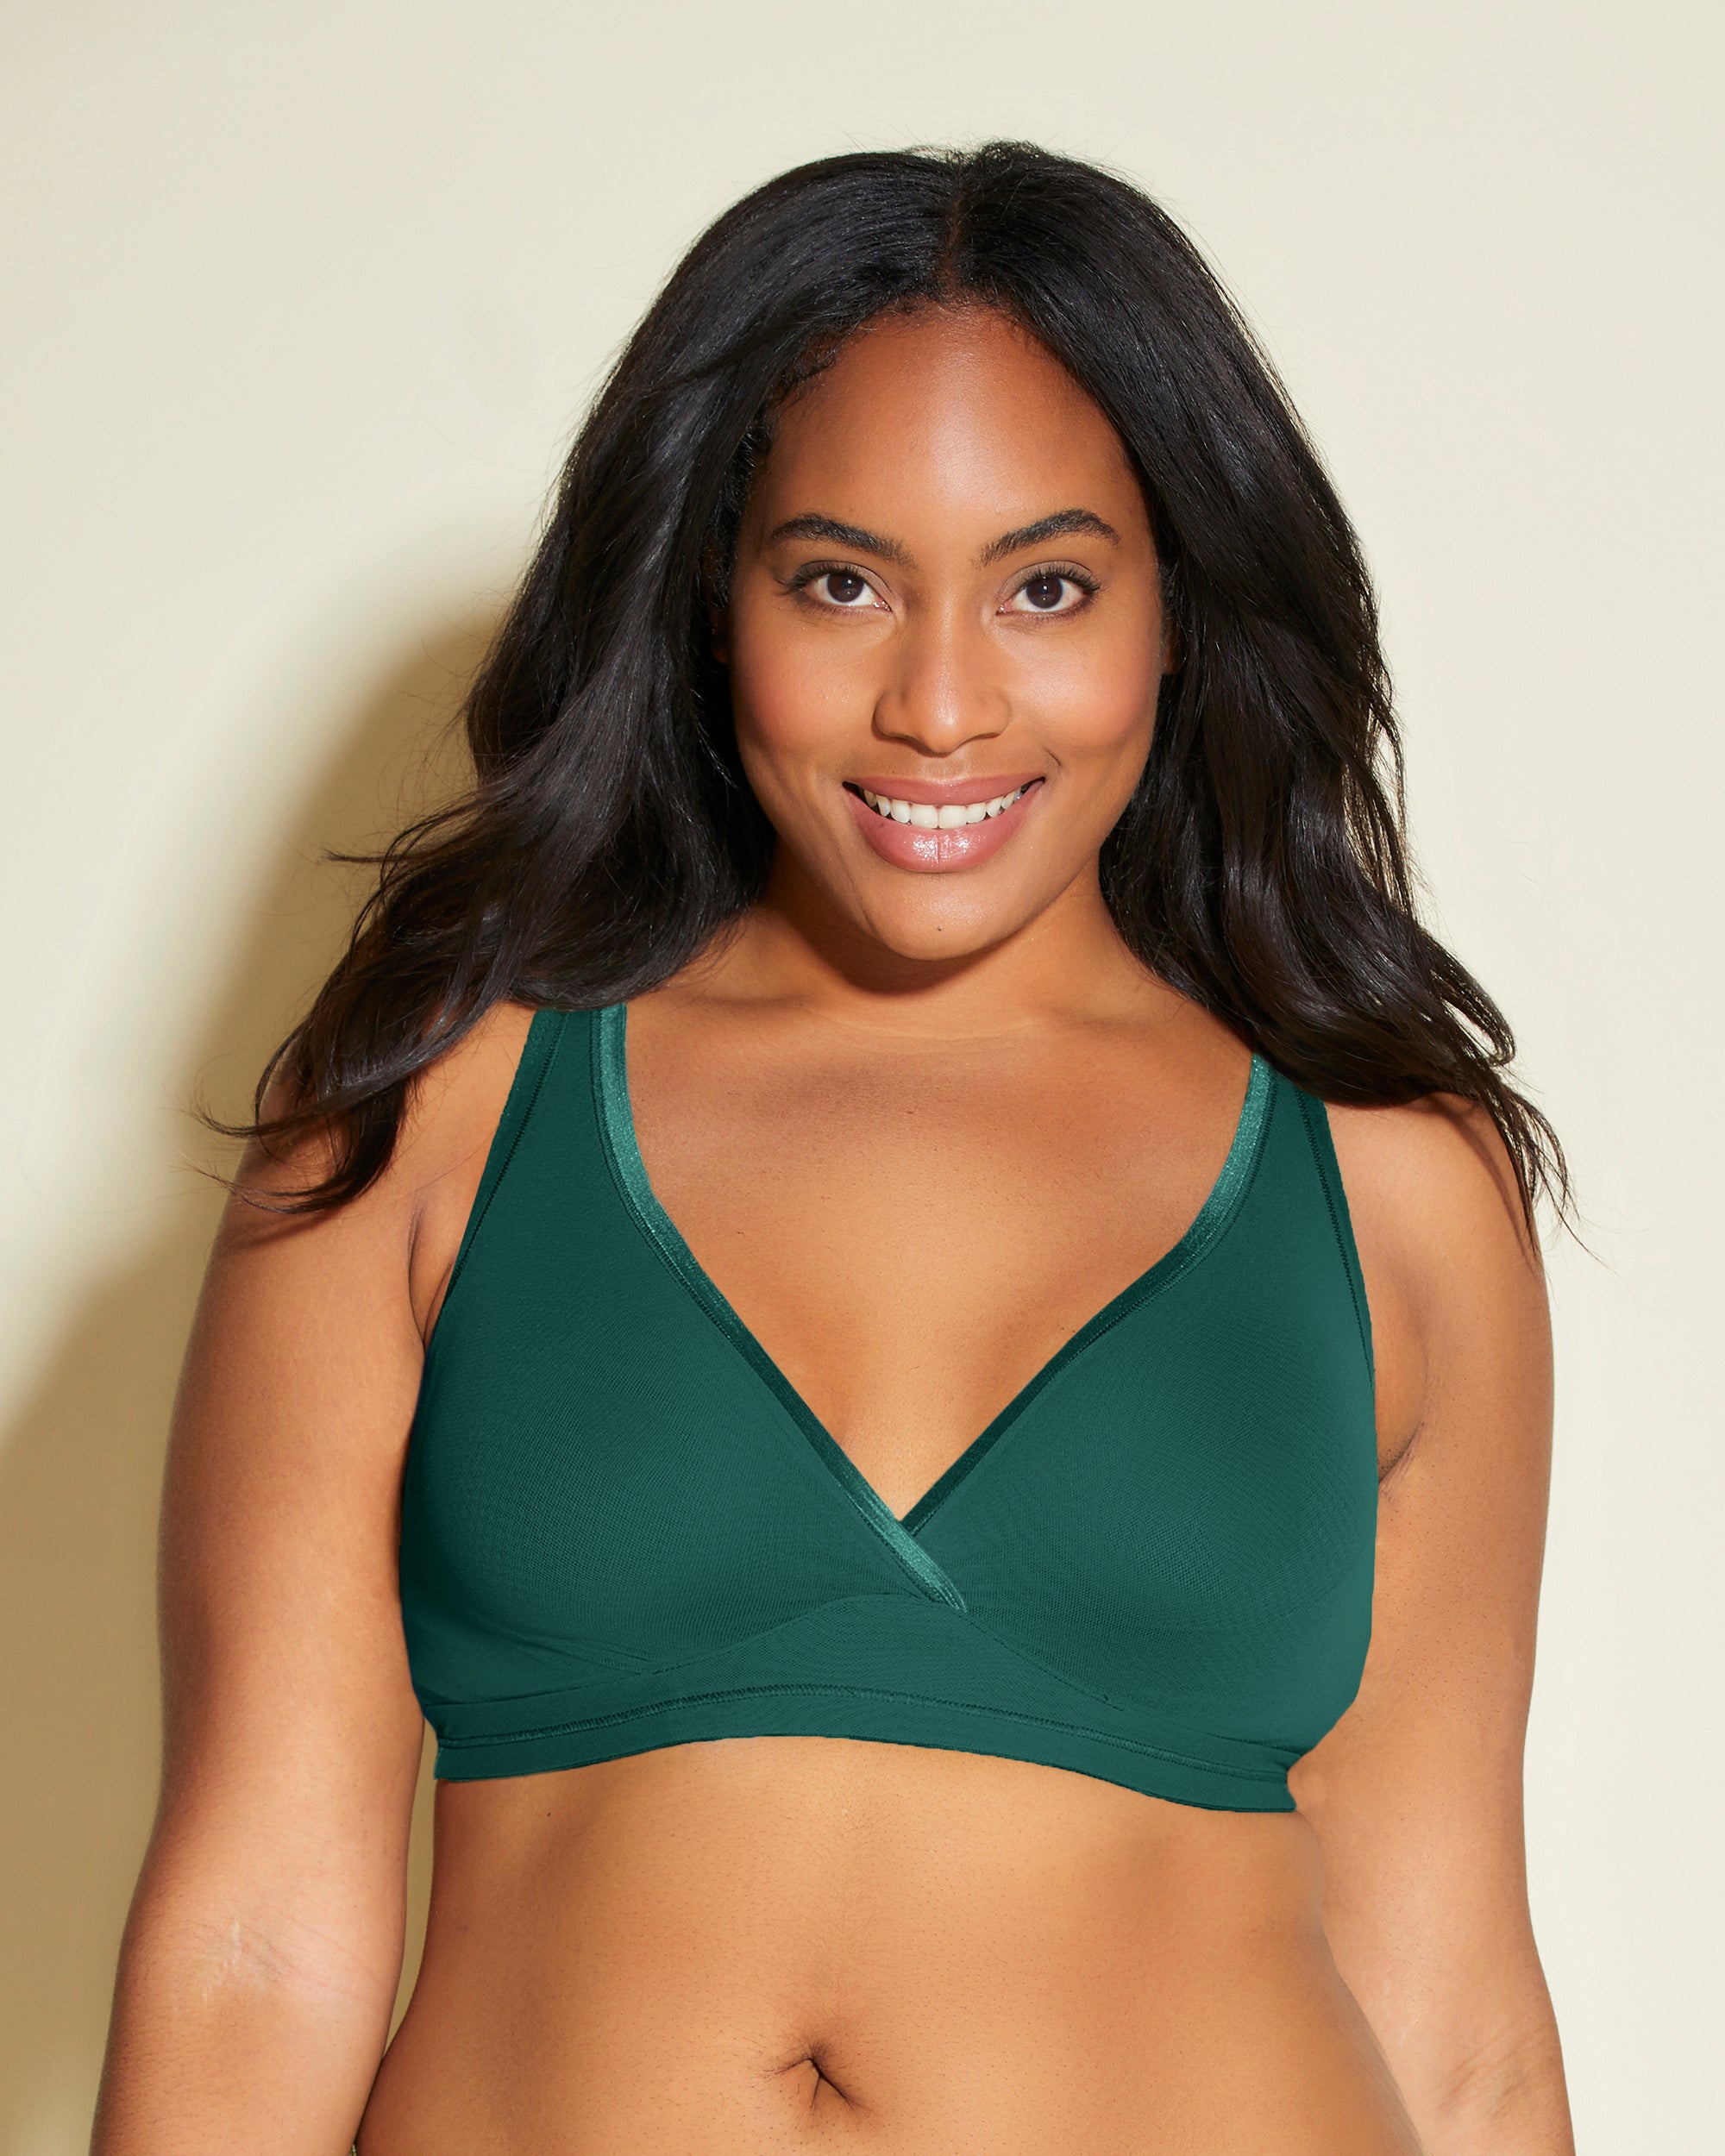 Here There padded wireless Bra size it 2a us 32a eu 70a green